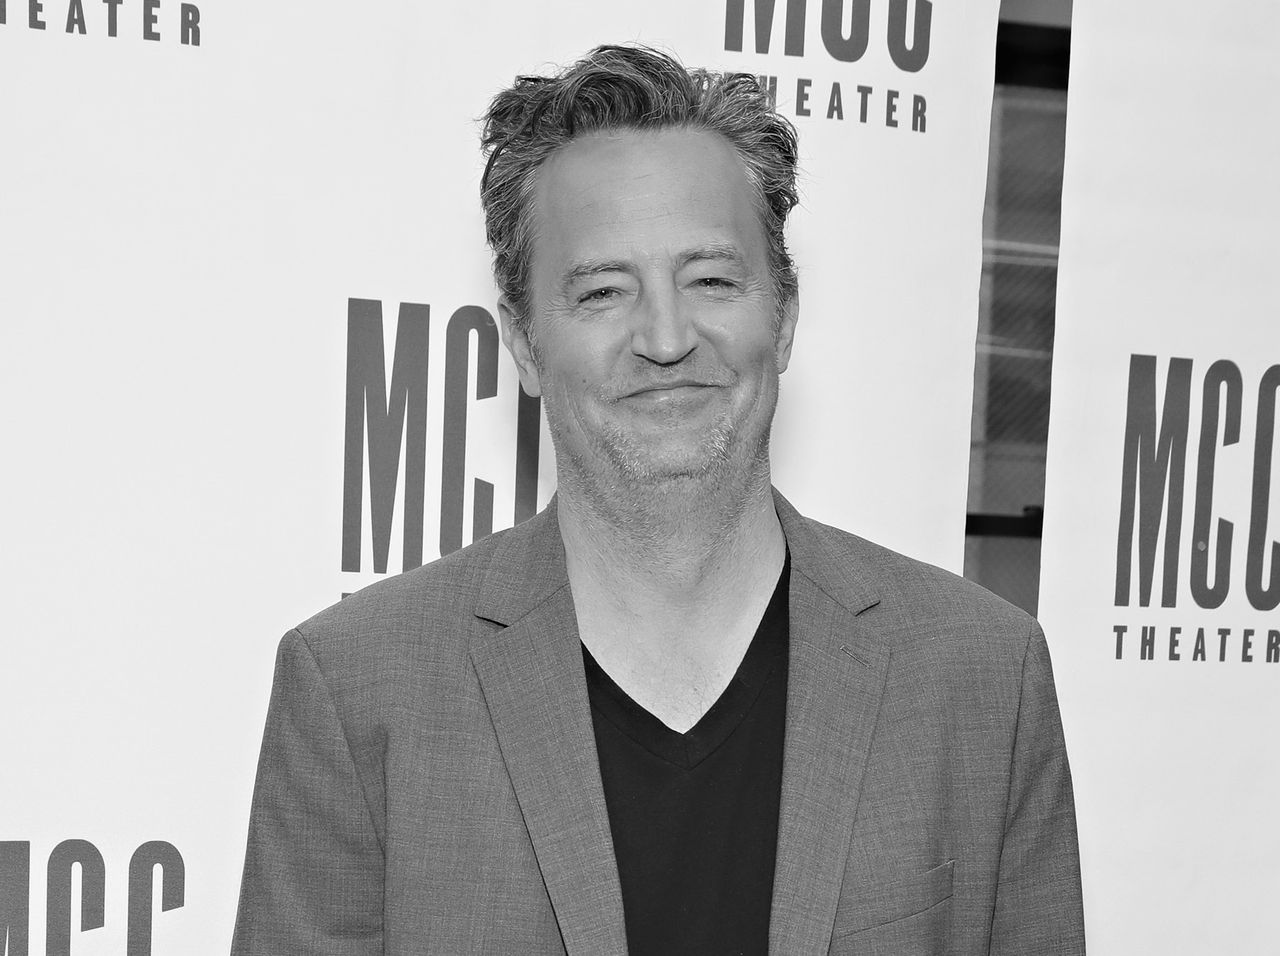 Matthew Perry was 54 years old.